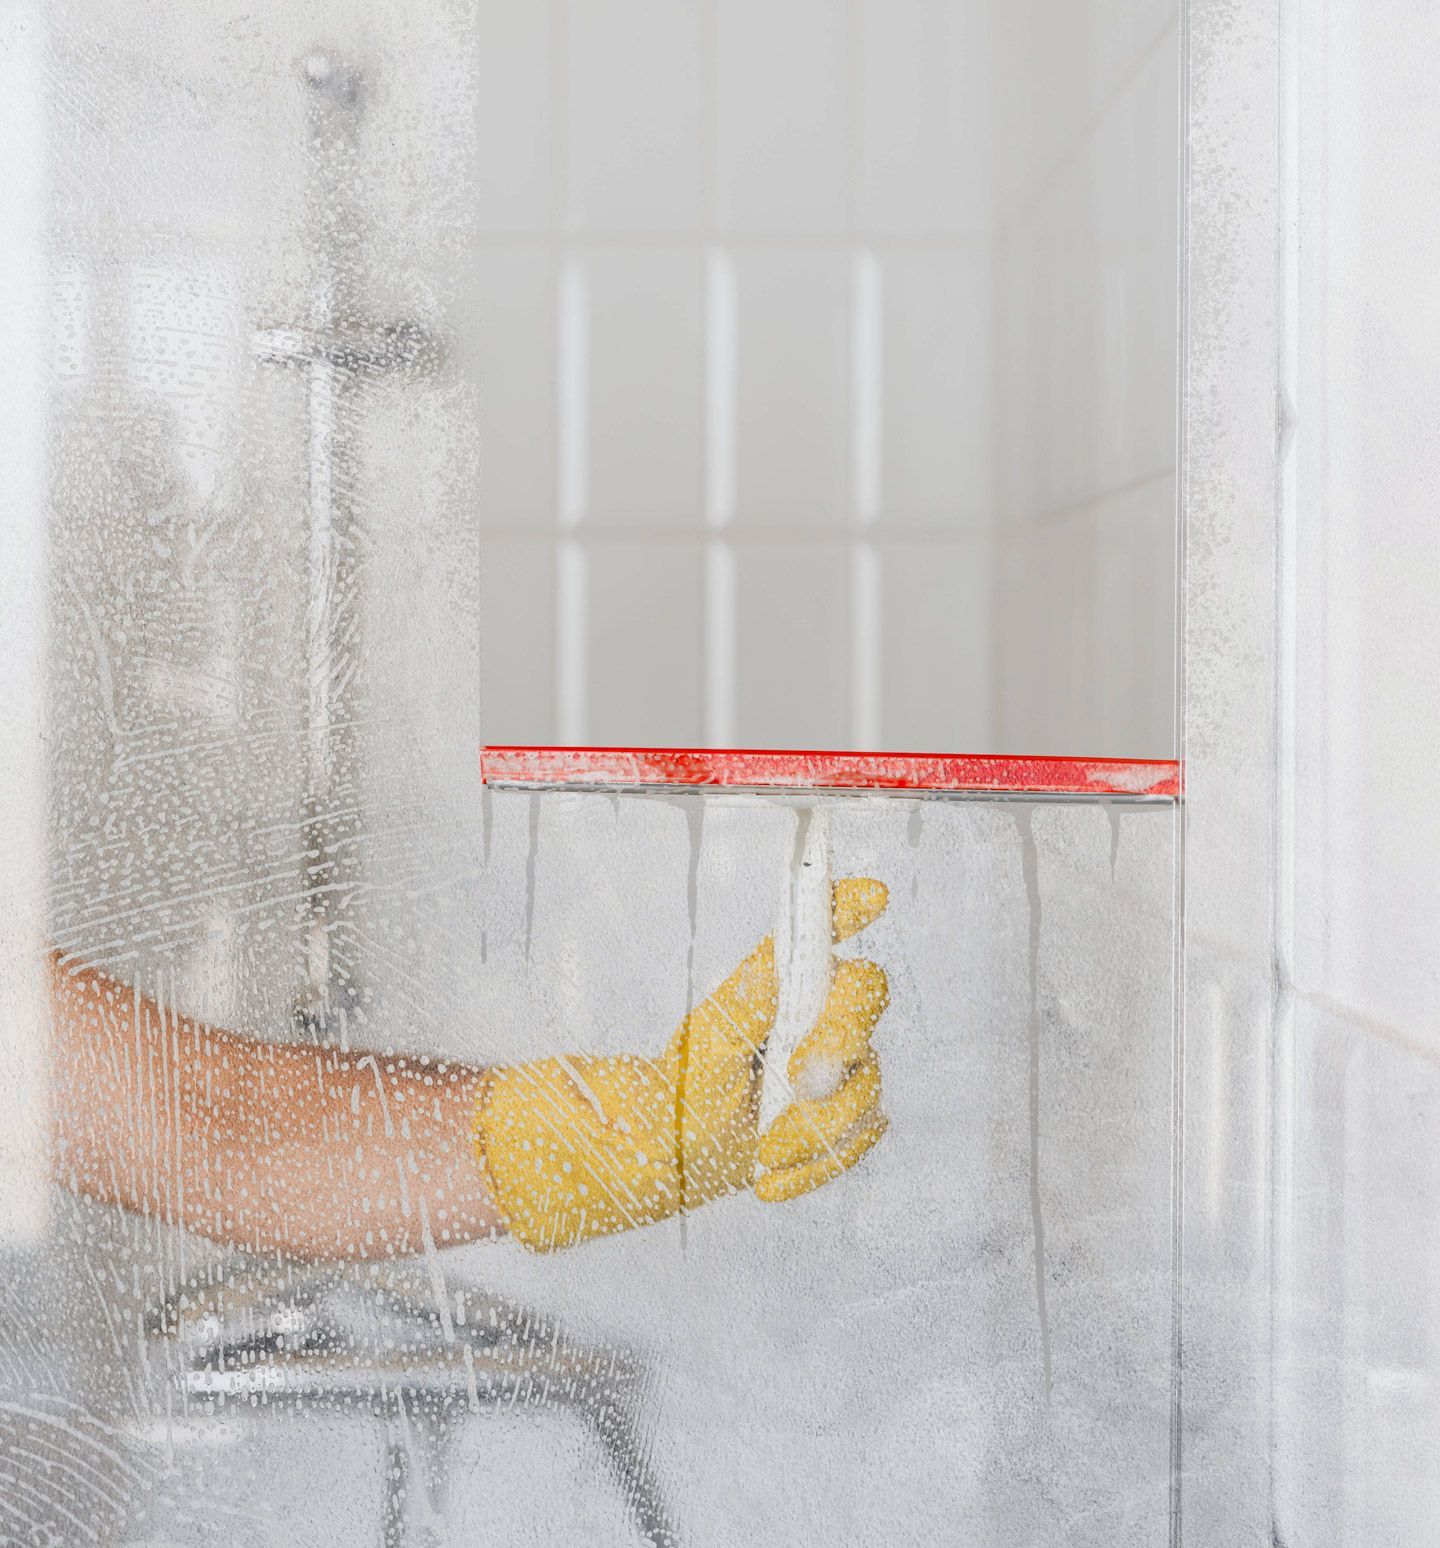 A surprising way to prevent soap scum build-up on glass shower doors